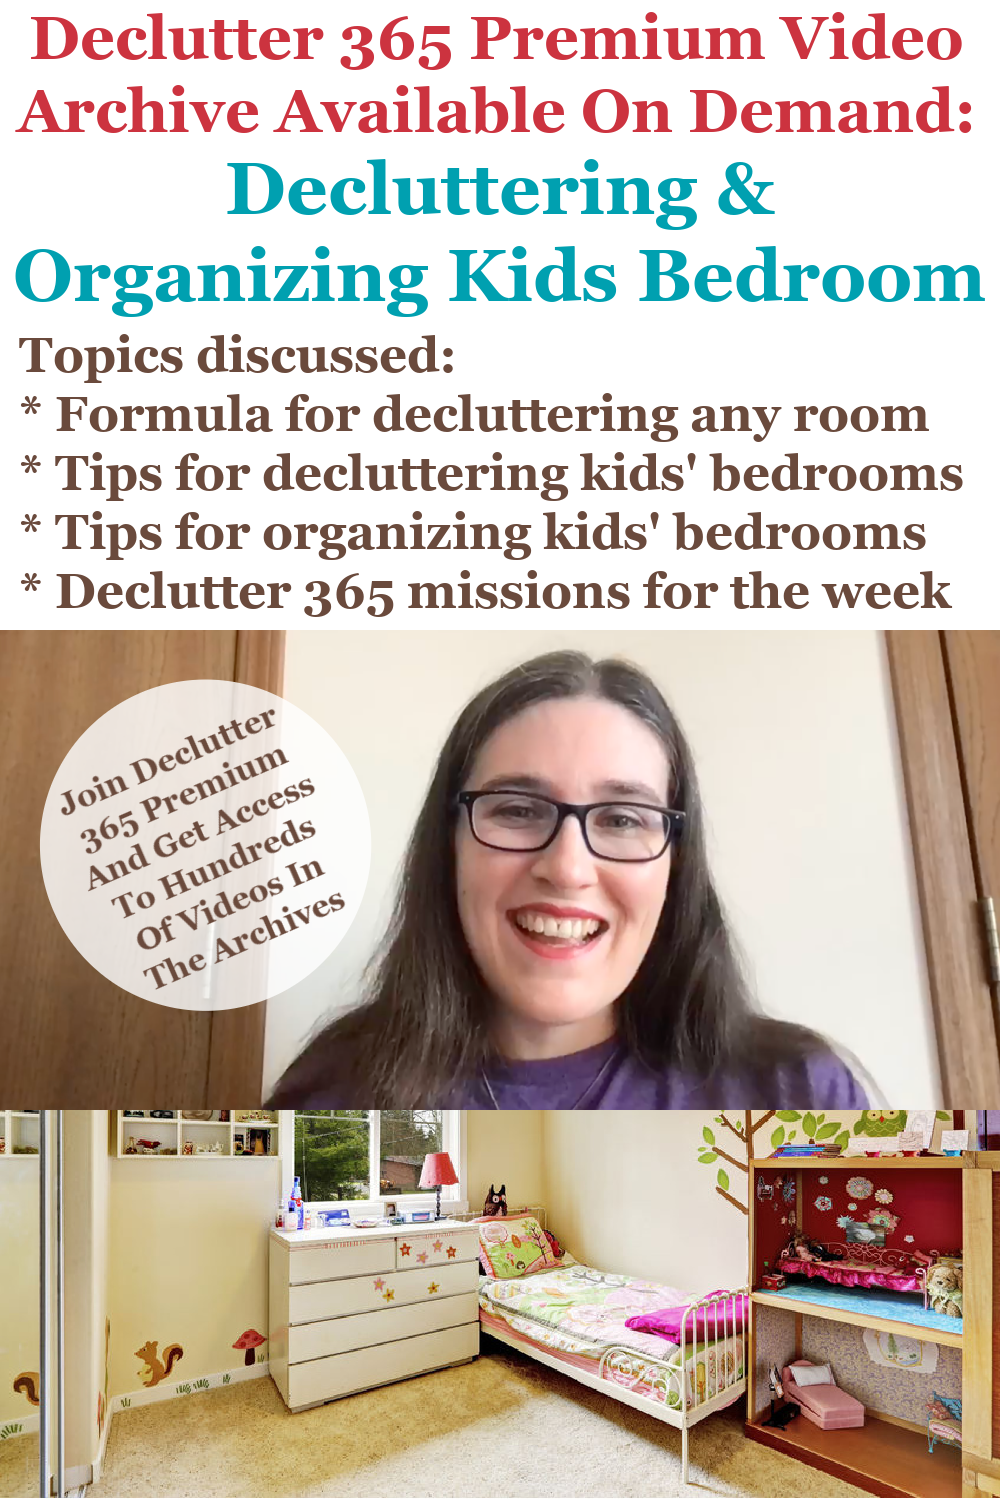 Declutter 365 Premium video archive available on demand all about decluttering and organizing kids' bedrooms, on Home Storage Solutions 101